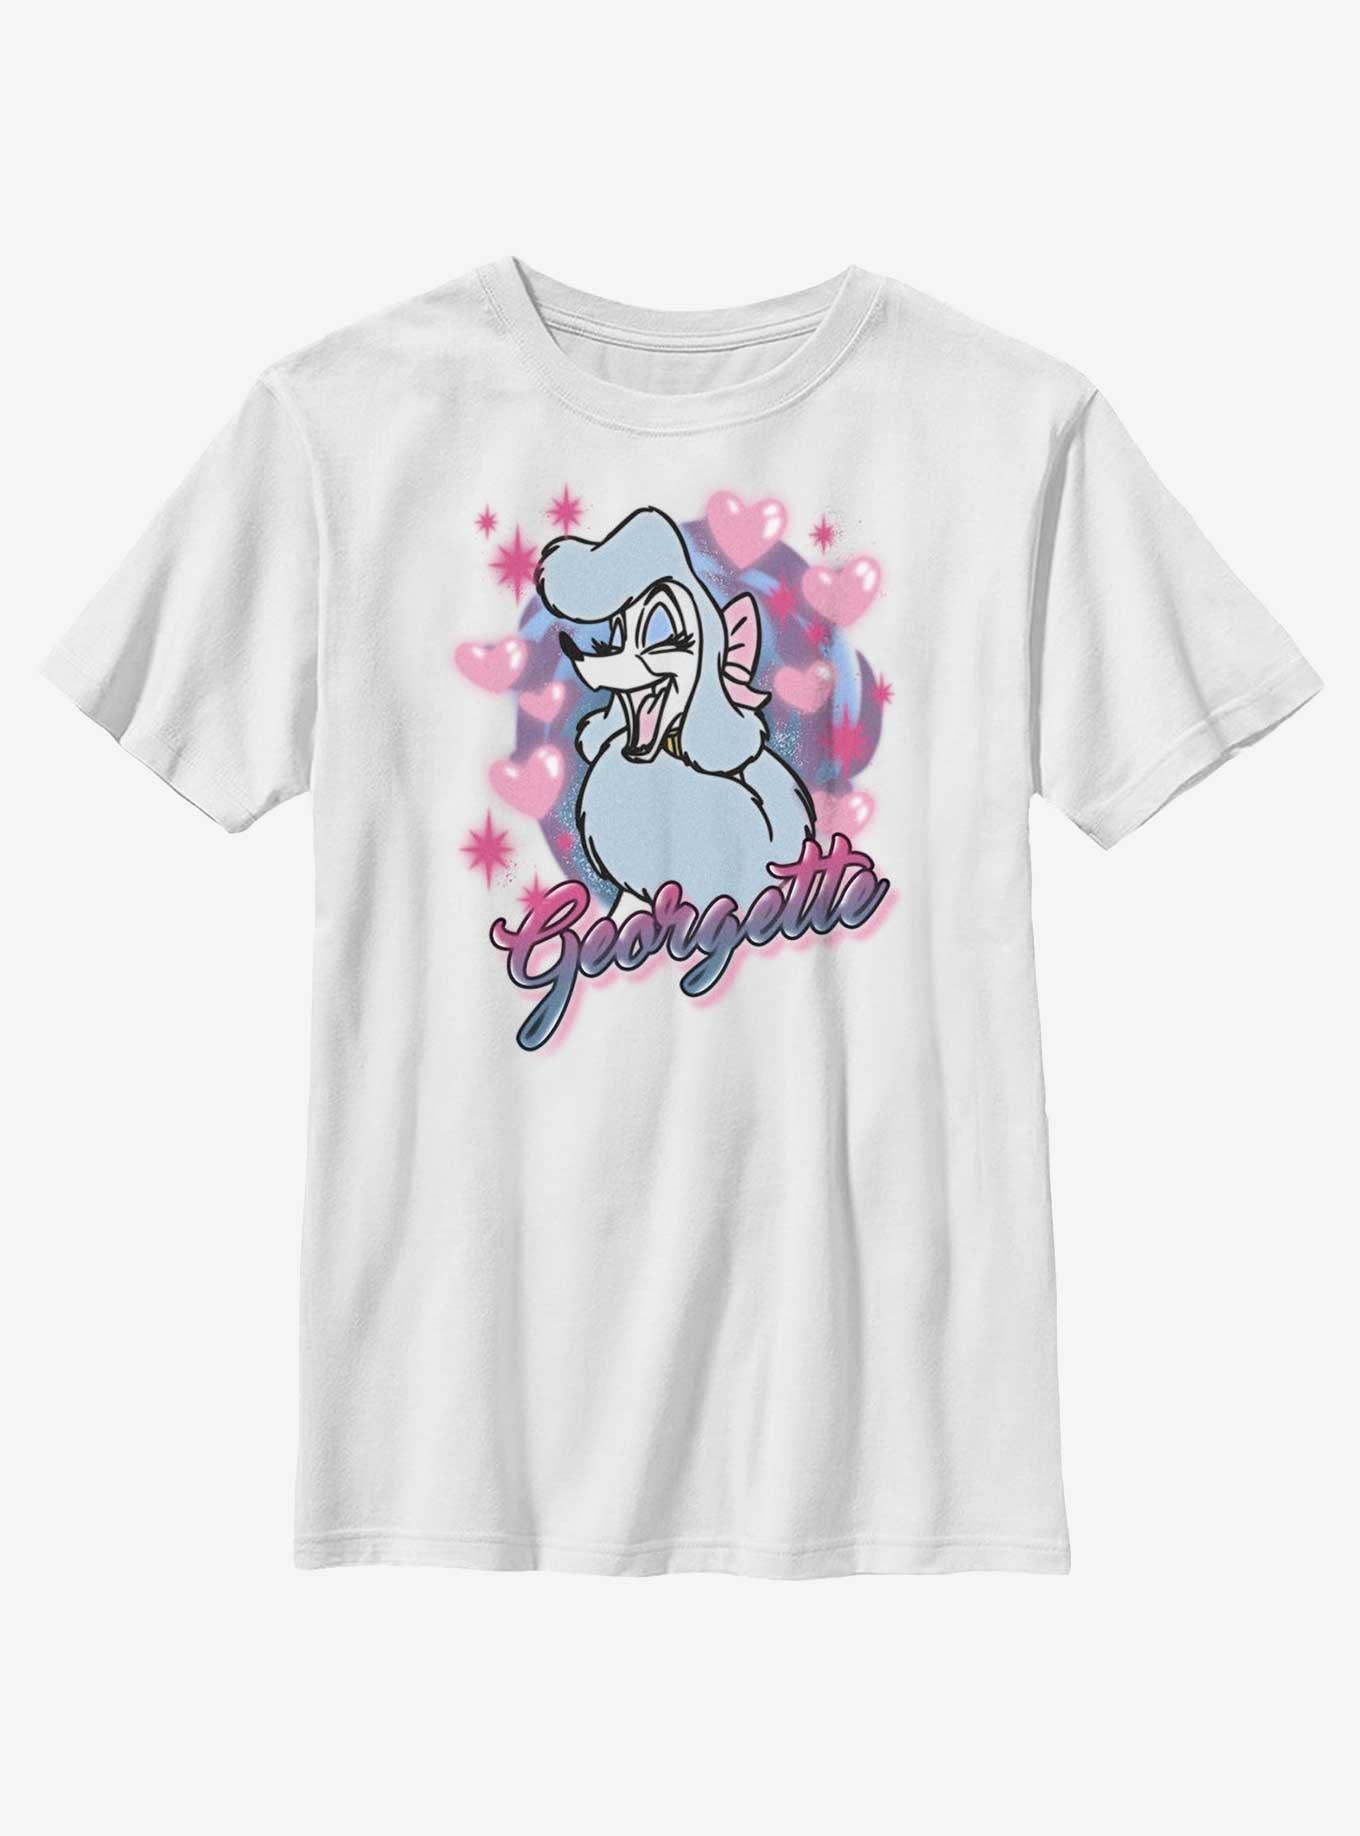 Disney Oliver & Company Airbrush Georgette Youth T-Shirt, WHITE, hi-res